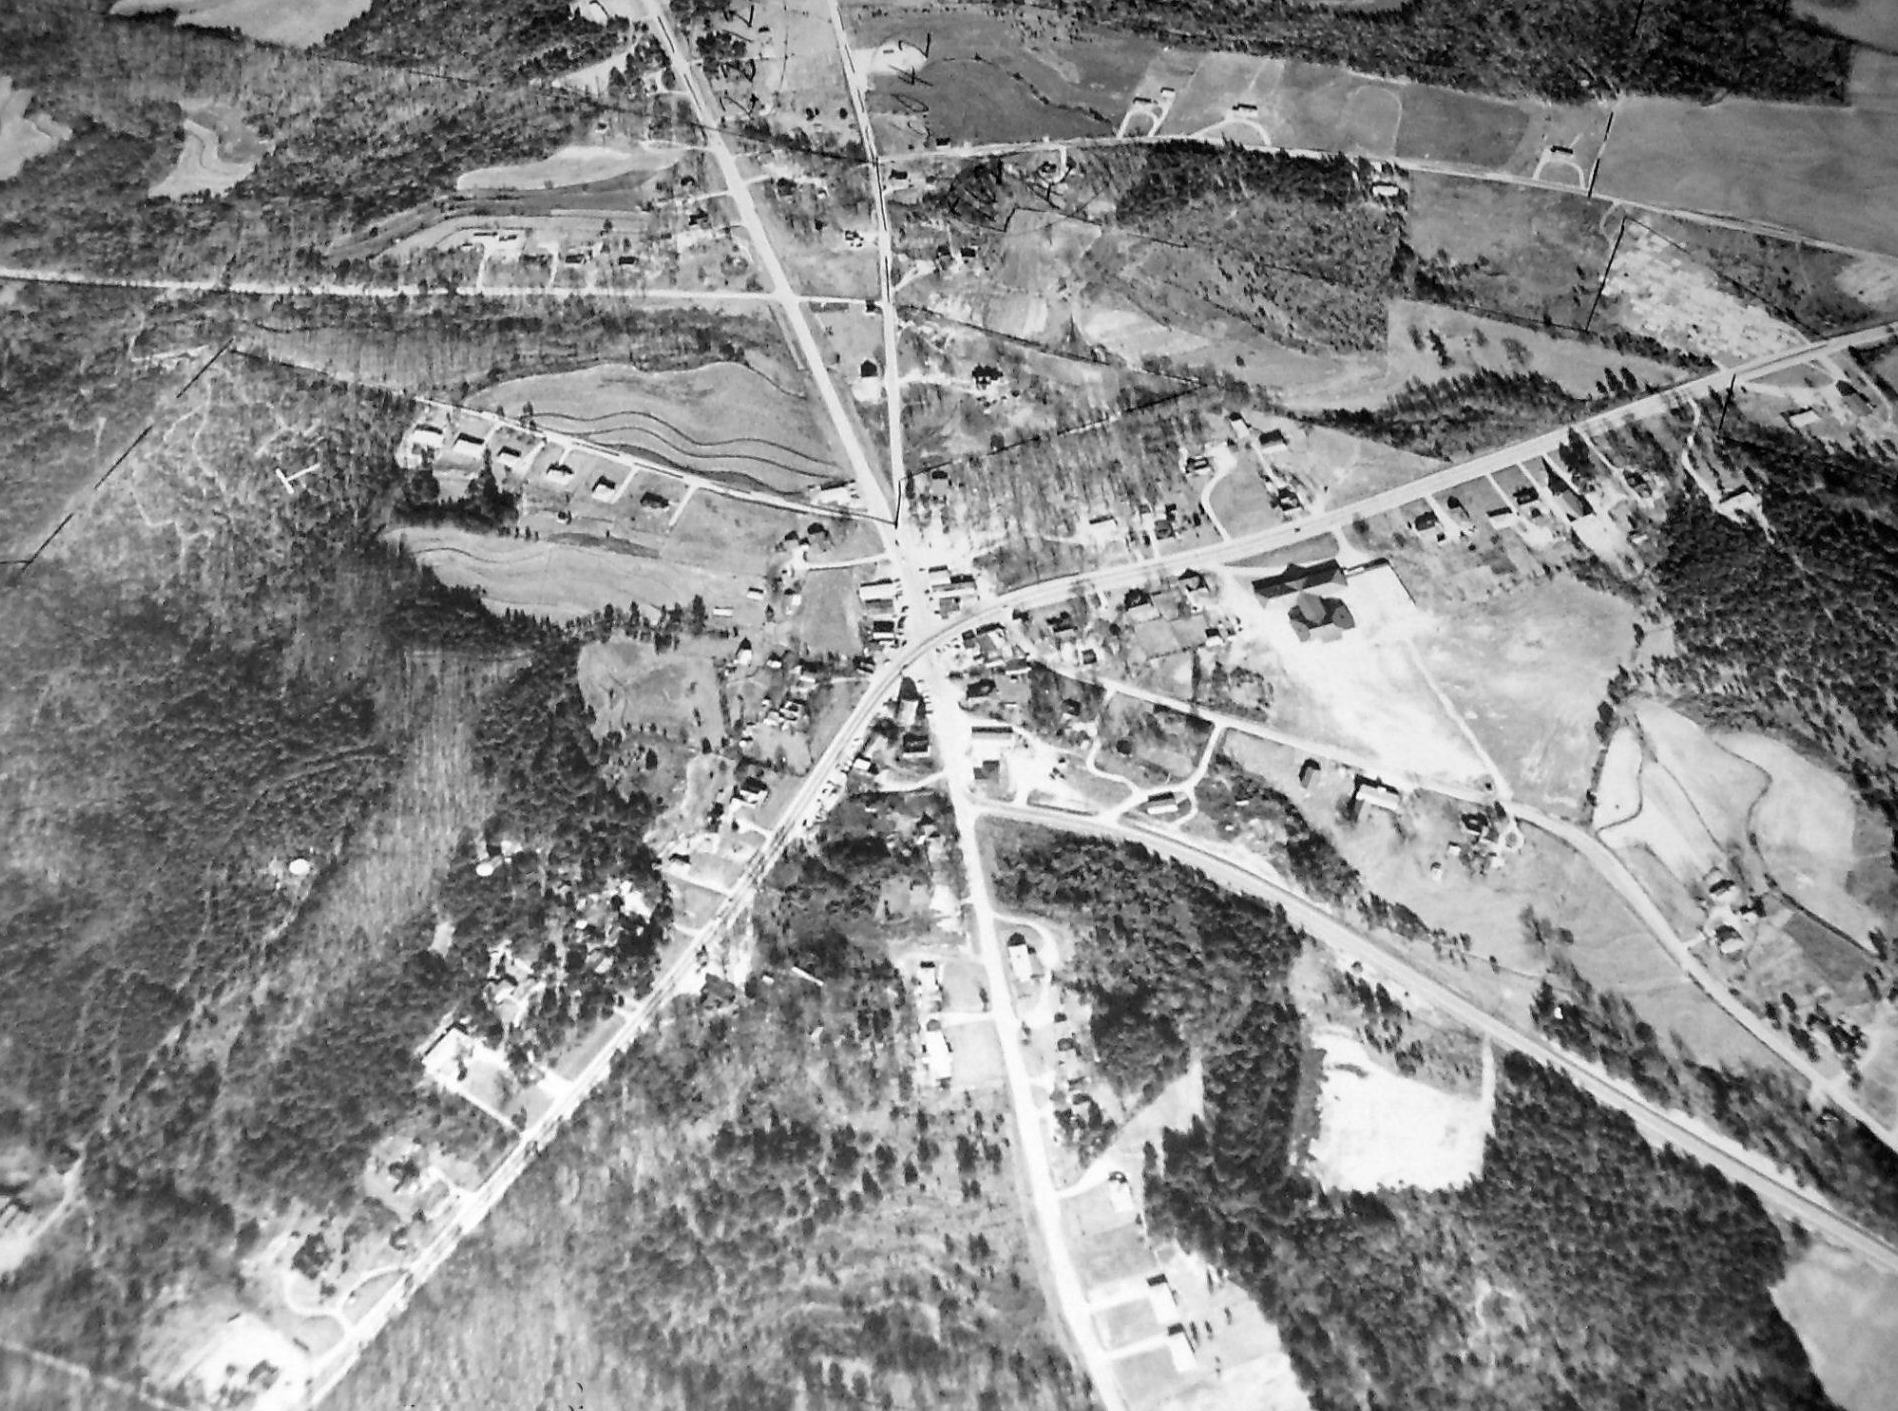 Snellville from above